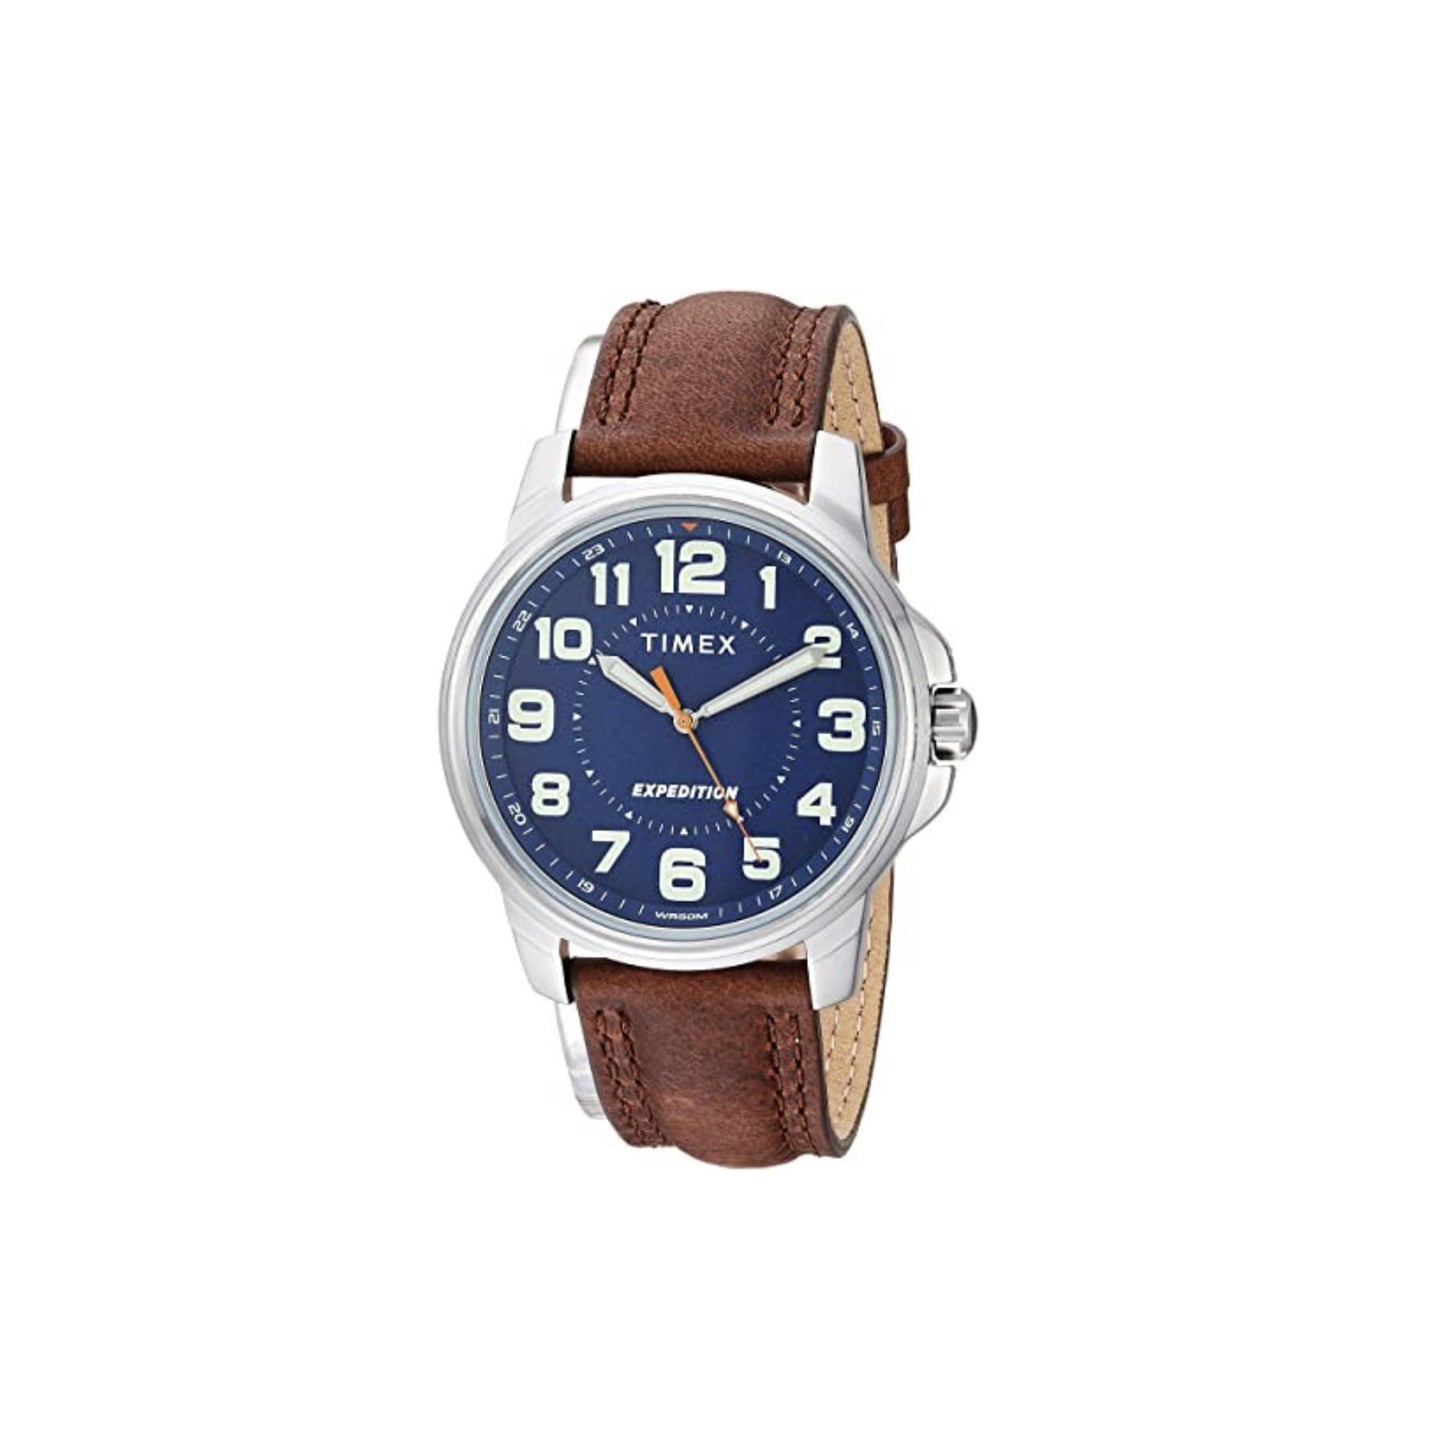 Timex Expedition Watch in Navy with Brown Leather Band